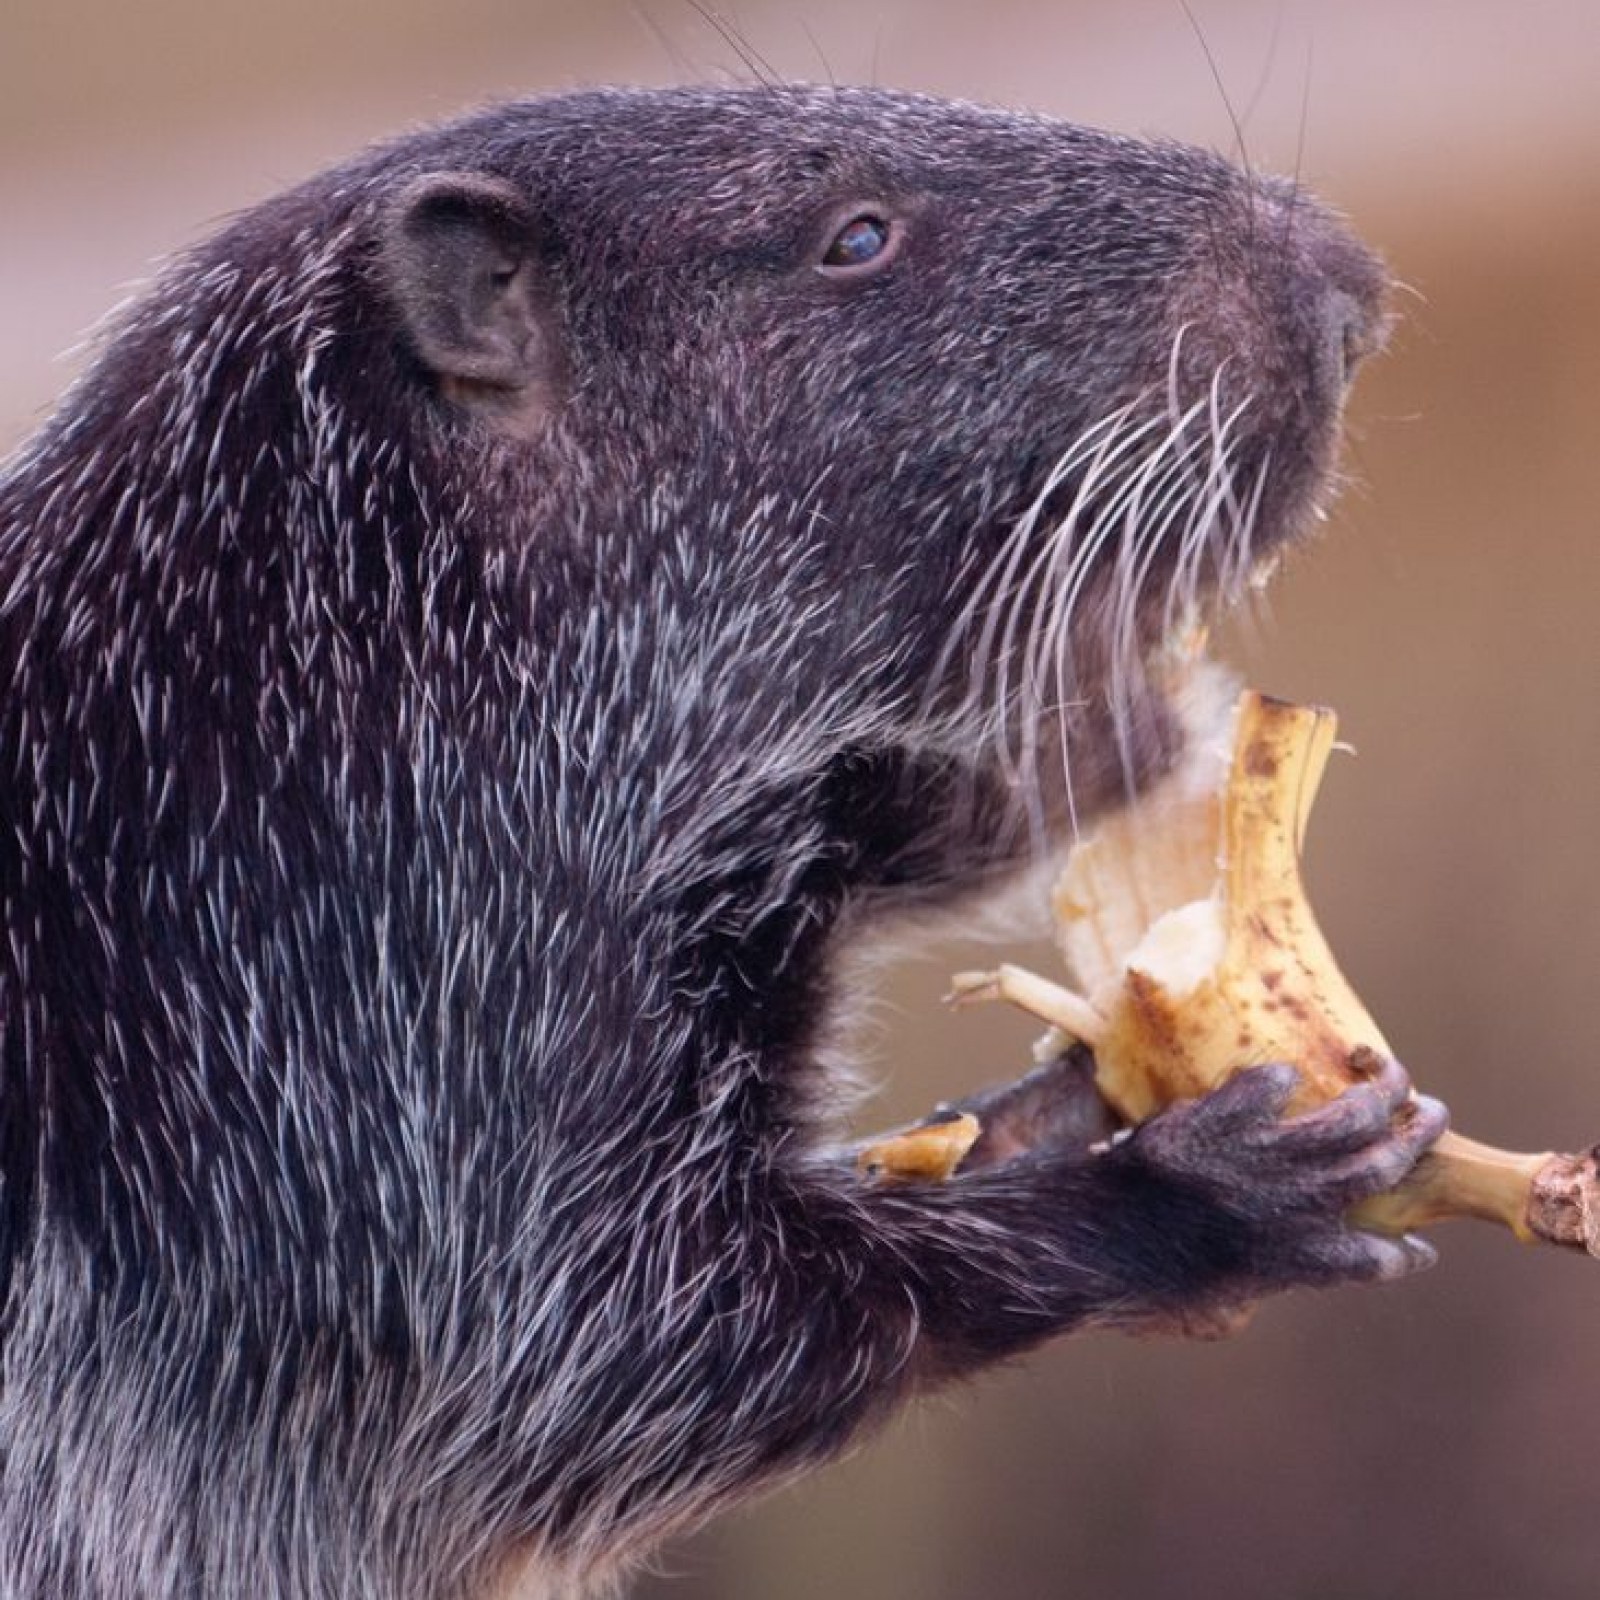 Viral 'Shower Rat' Video Is Not What We Think—for Starters, It's Not a Rat